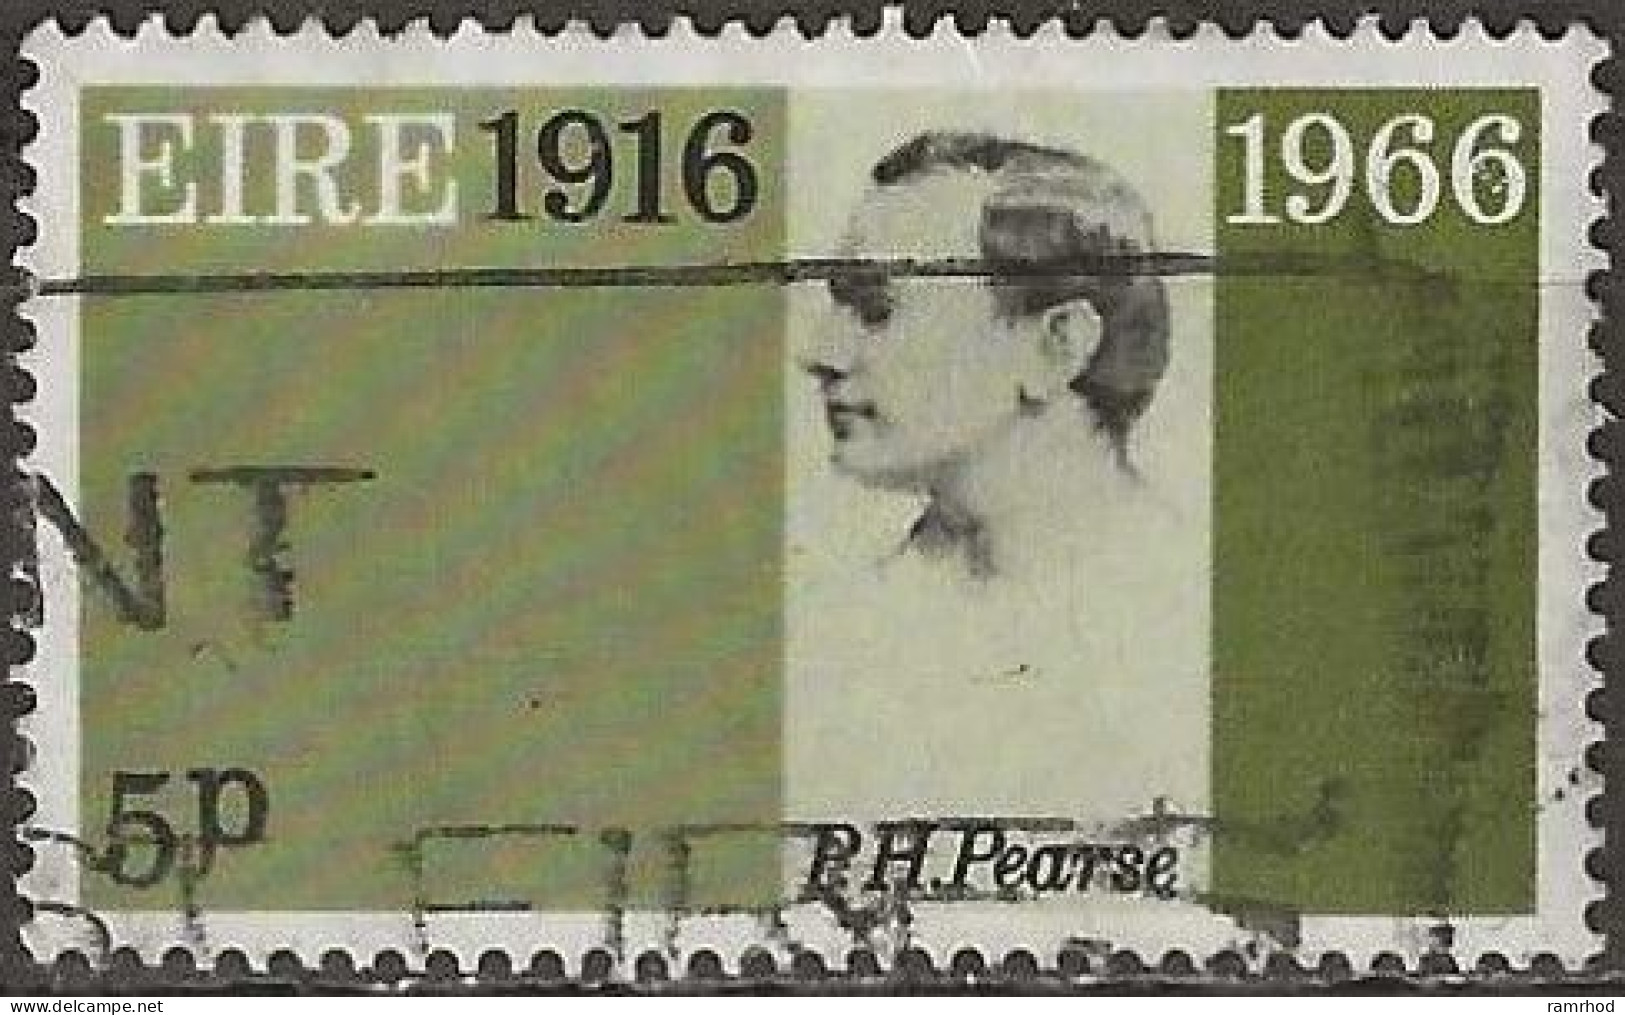 IRELAND 1966 50th Anniversary Of Easter Rising - 5d P. H. Pearse FU - Used Stamps